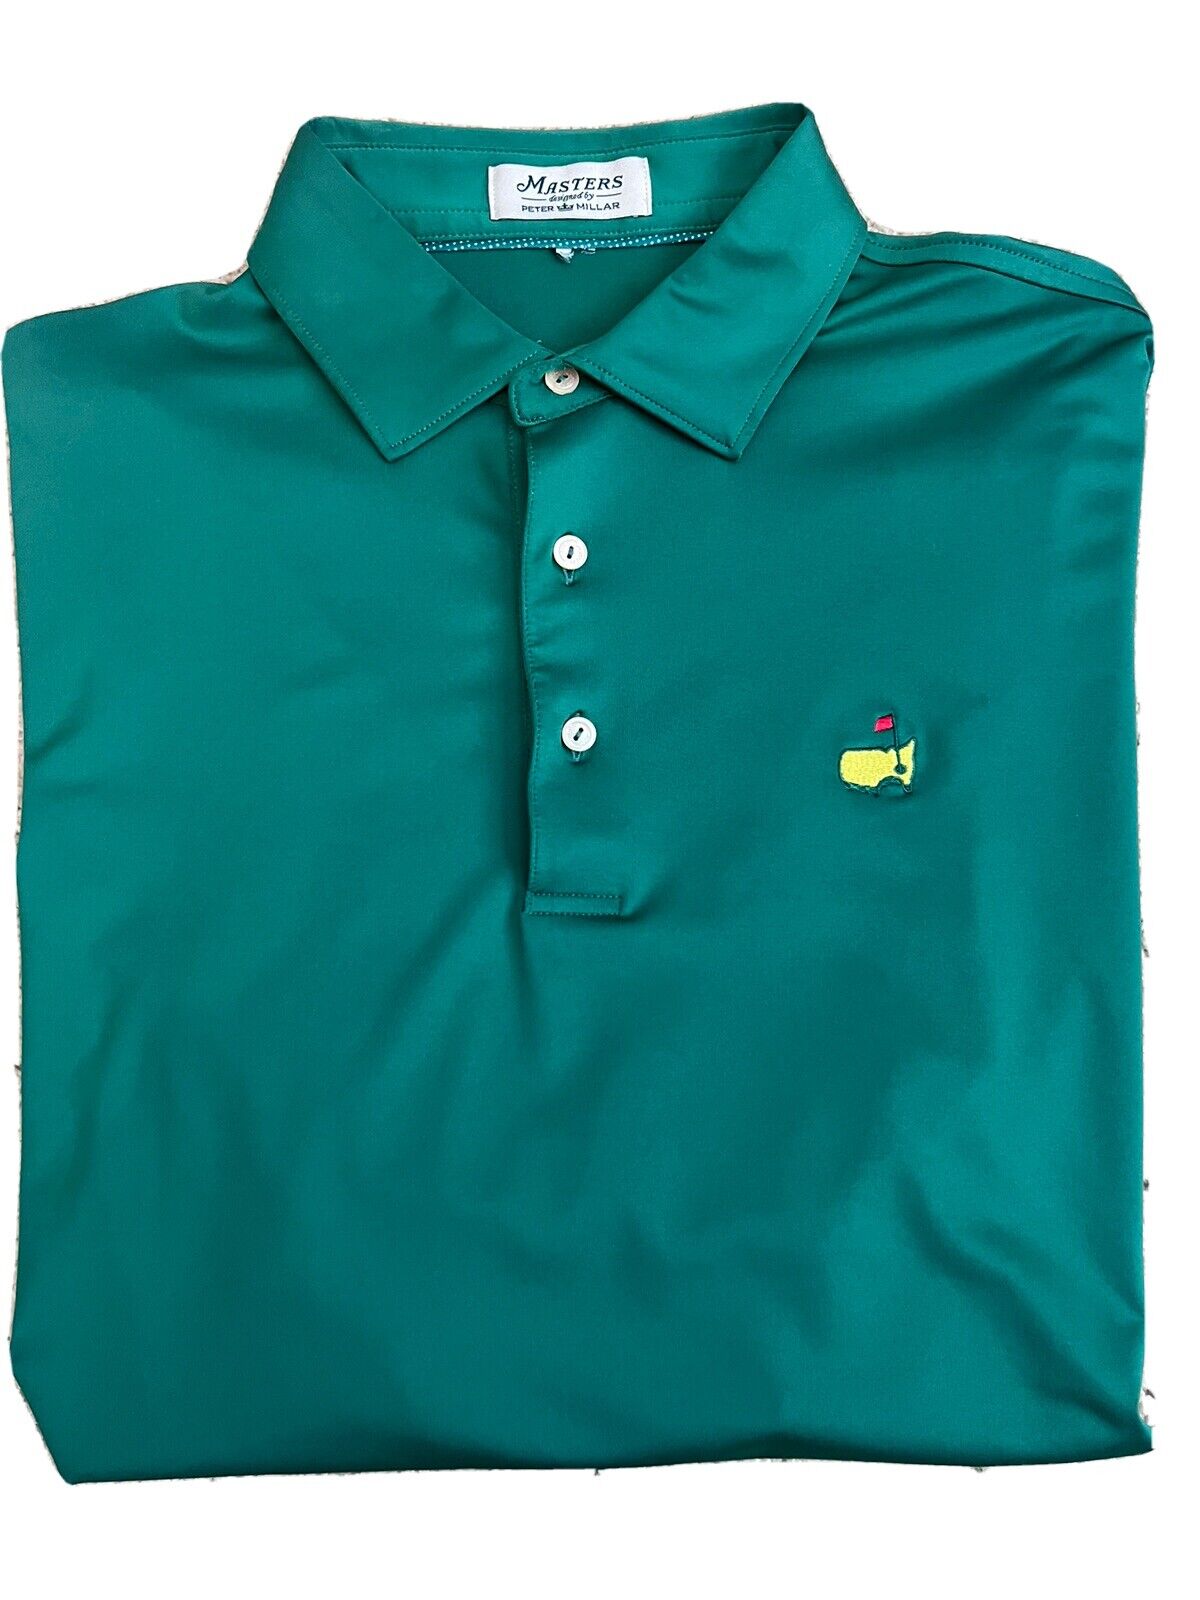 Peter Millar Mens Large Masters Short Sleeve Golf Polo - Masters Green